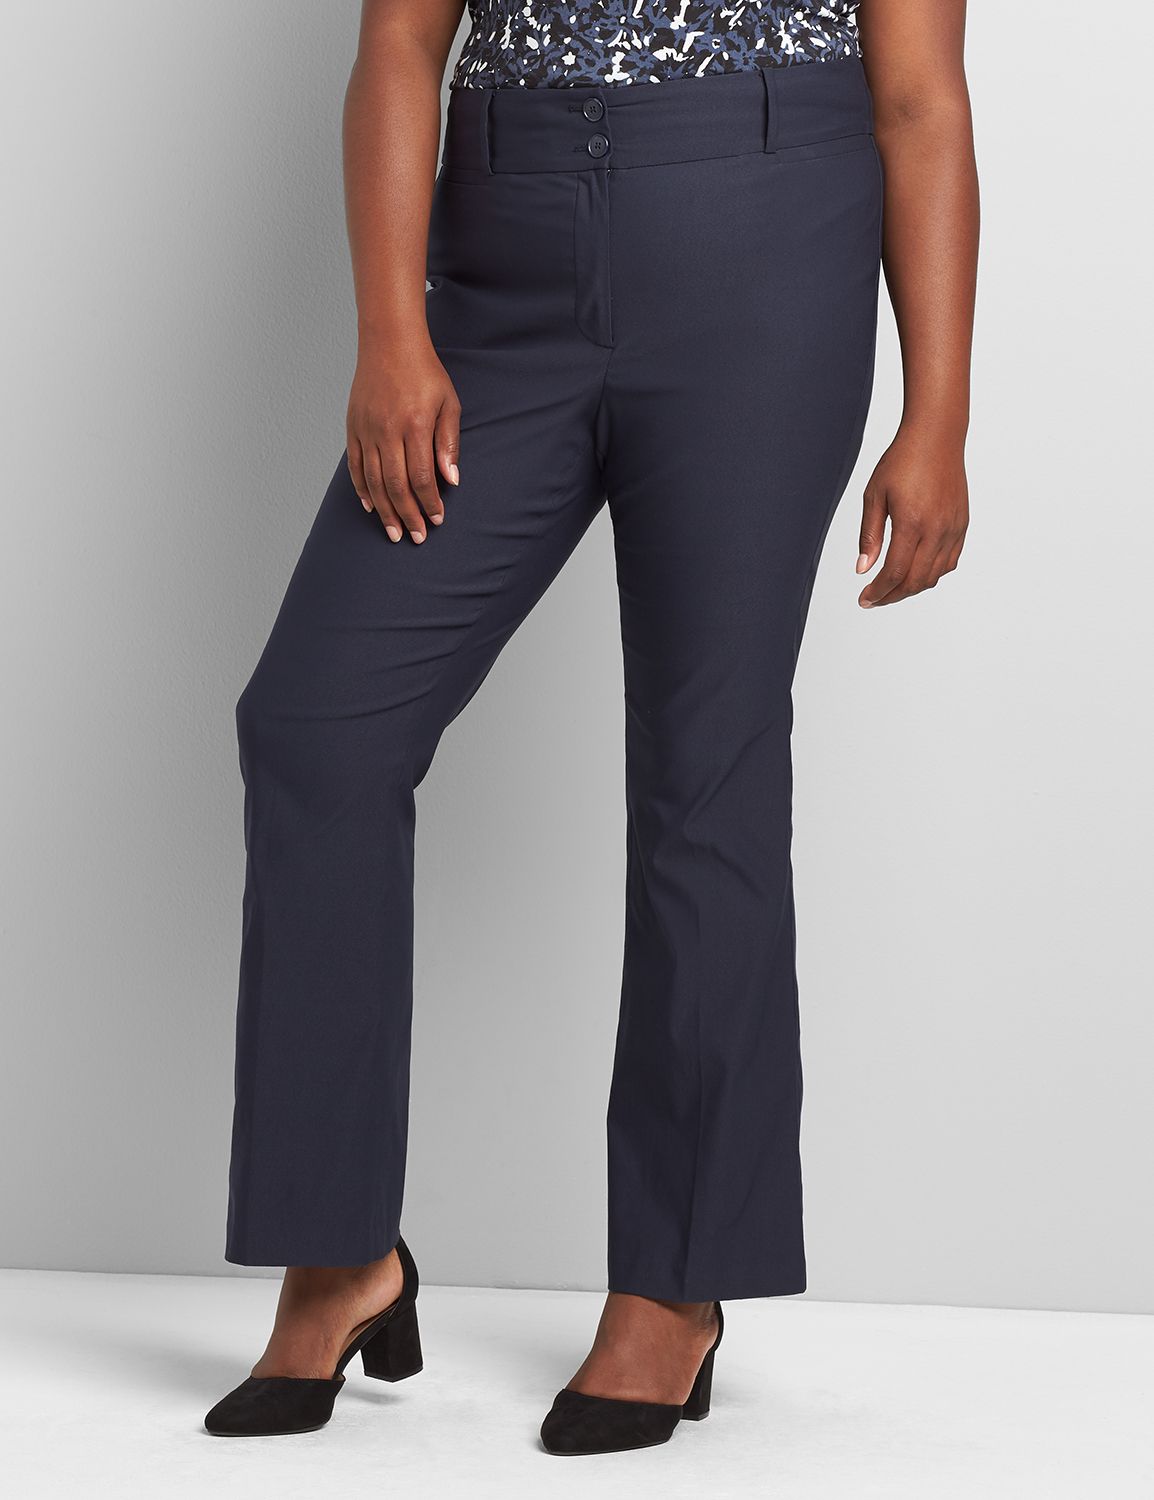 Women's Plus Size Boot Cut Pull-On Pant